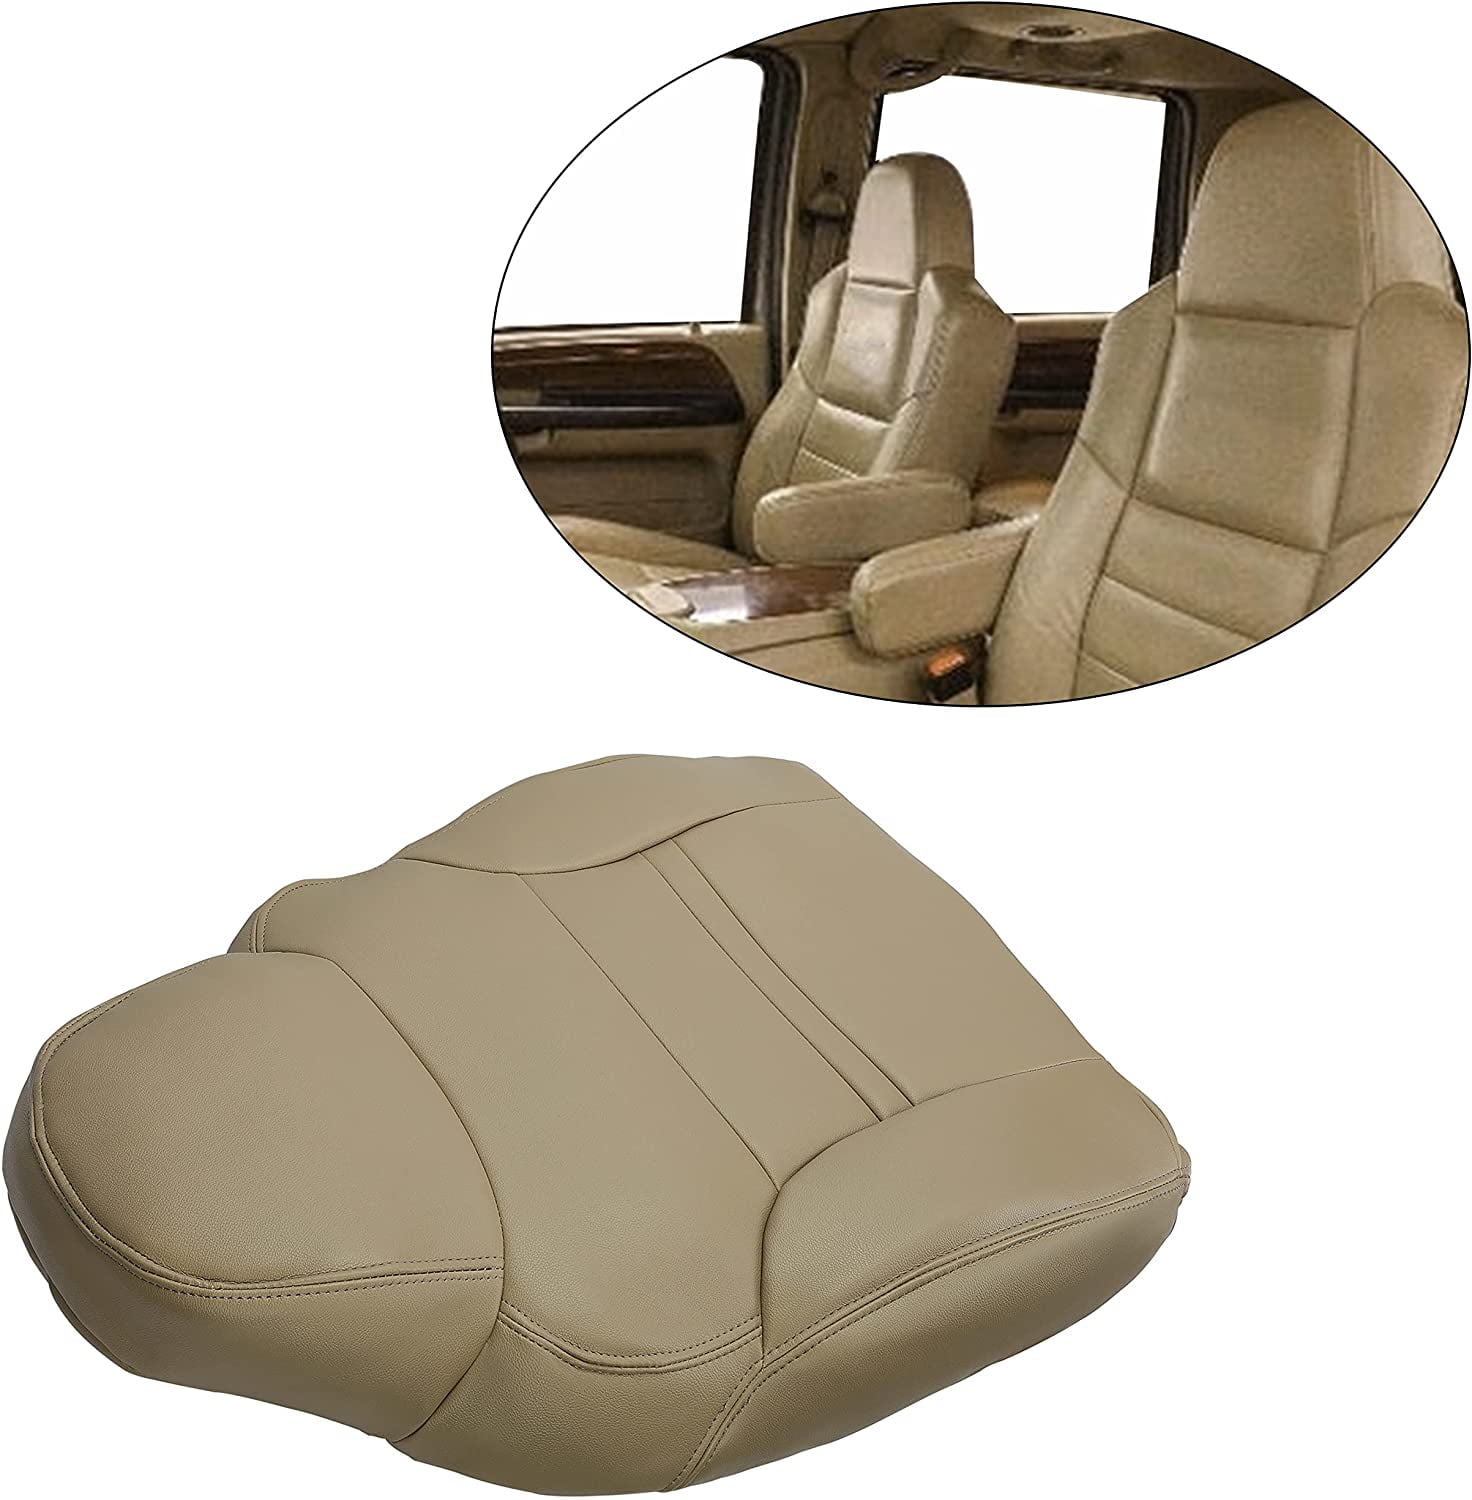 2000 2001 Ford Excursion Limited Driver Passenger Bottom Vinyl Seat Cover Tan